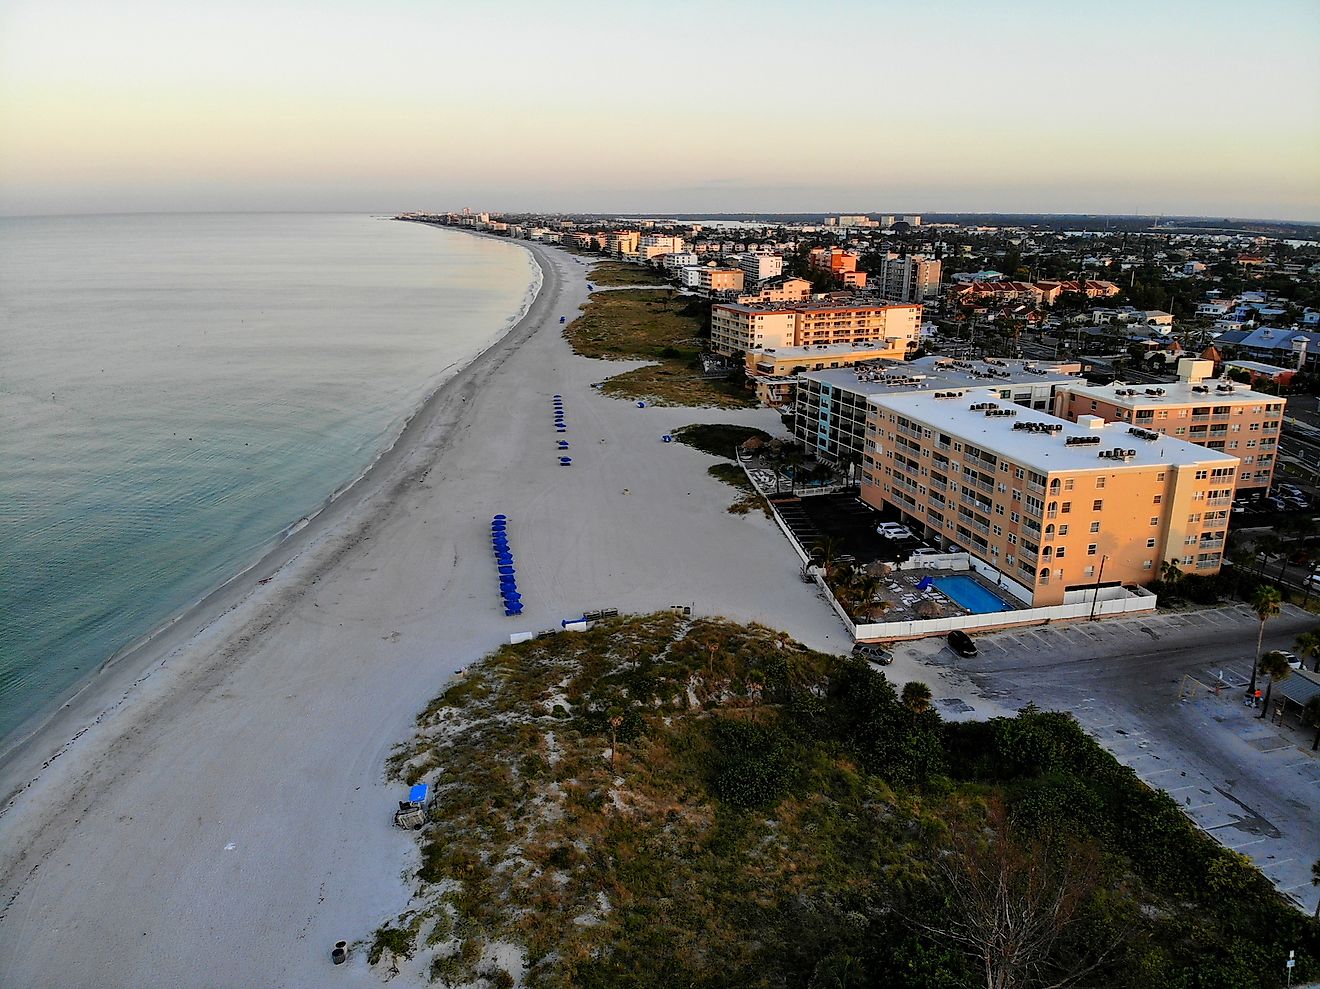 The aerial view of the beach and waterfront resorts hotel at Madeira Beach. Editorial credit: Khairil Azhar Junos / Shutterstock.com